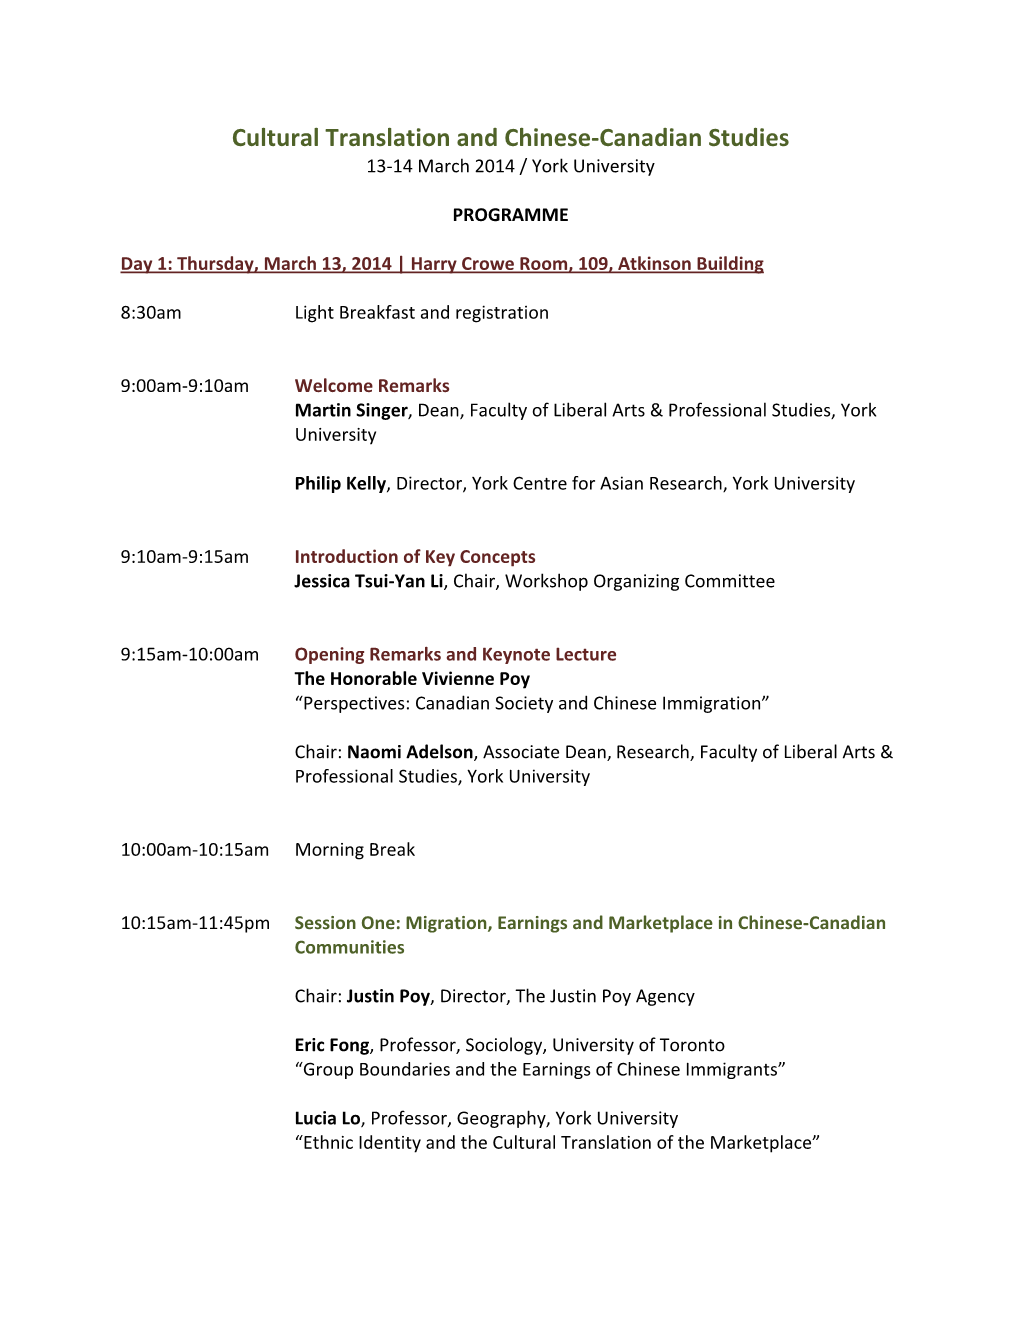 Cultural Translation and Chinese-Canadian Studies | 13-14 March 2014